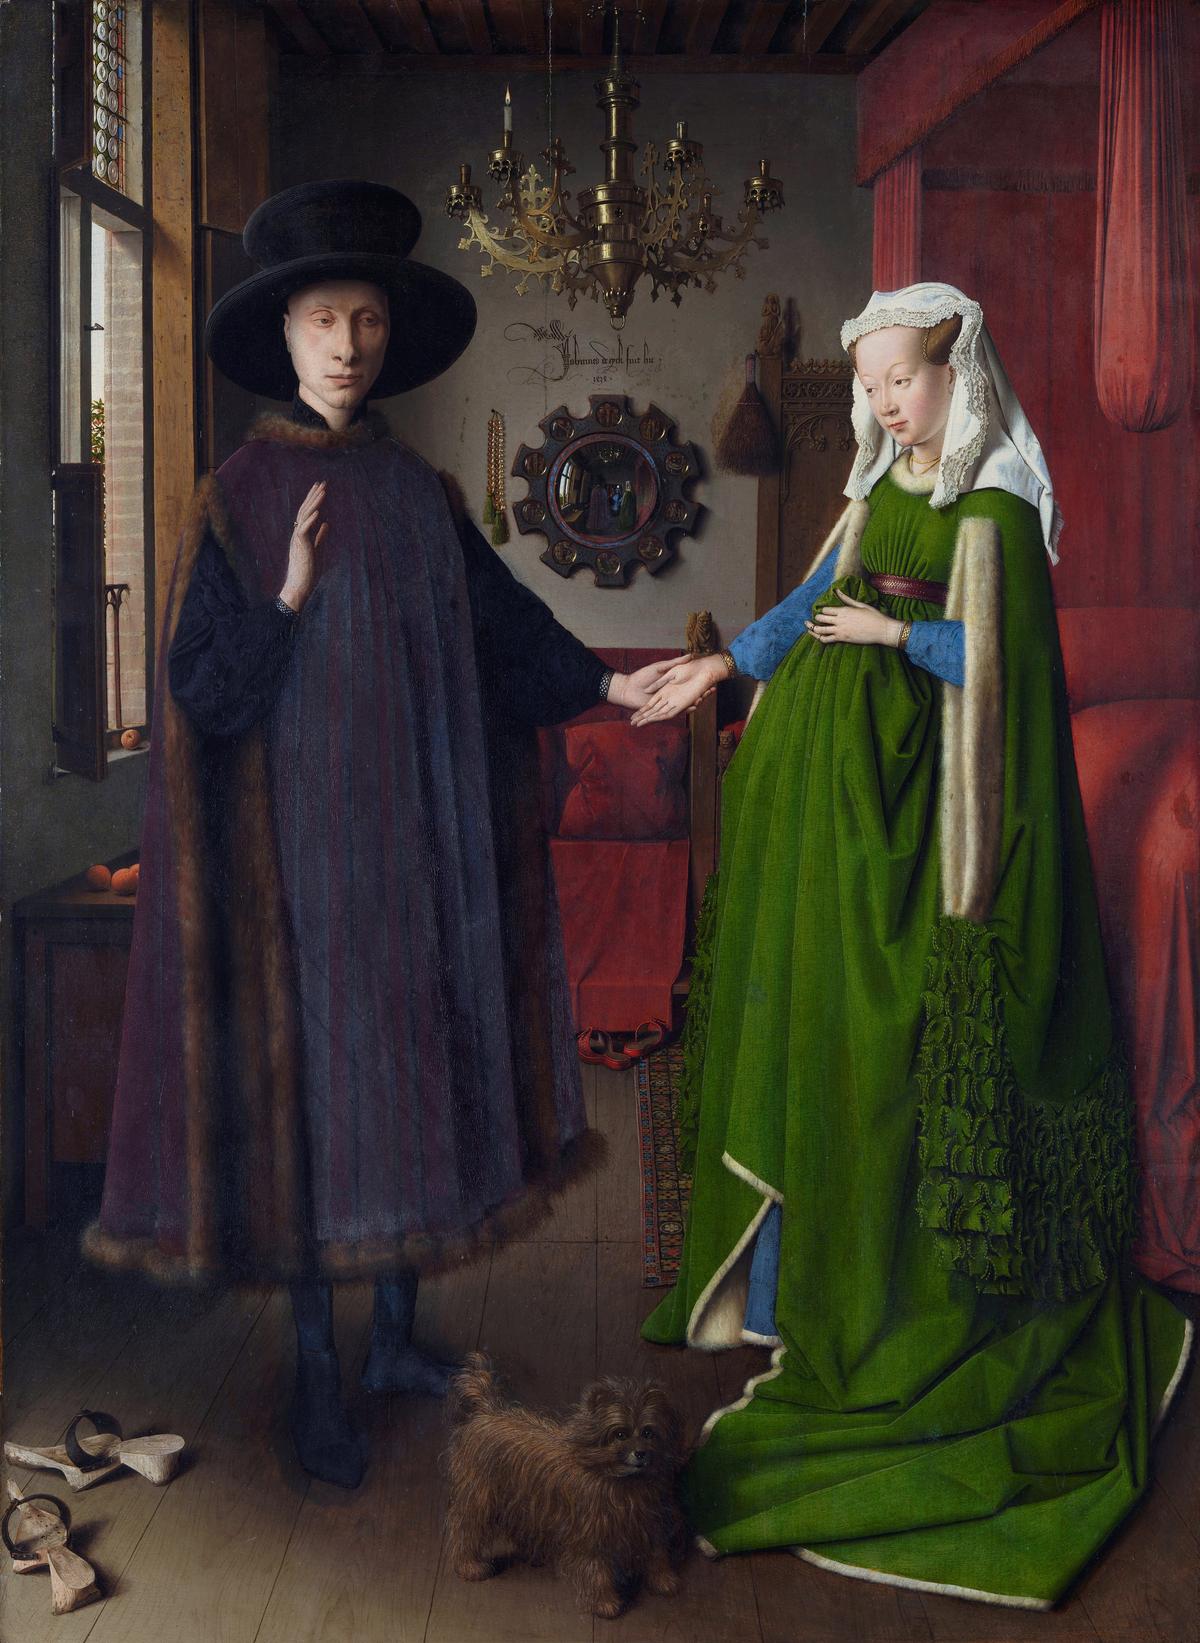 “The Arnolfini Portrait,” 1434, by Jan van Eyck. Oil on oak panel of 3 vertical boards, 32.4 inches by 23.6 inches. National Gallery, London. (Public Domain)